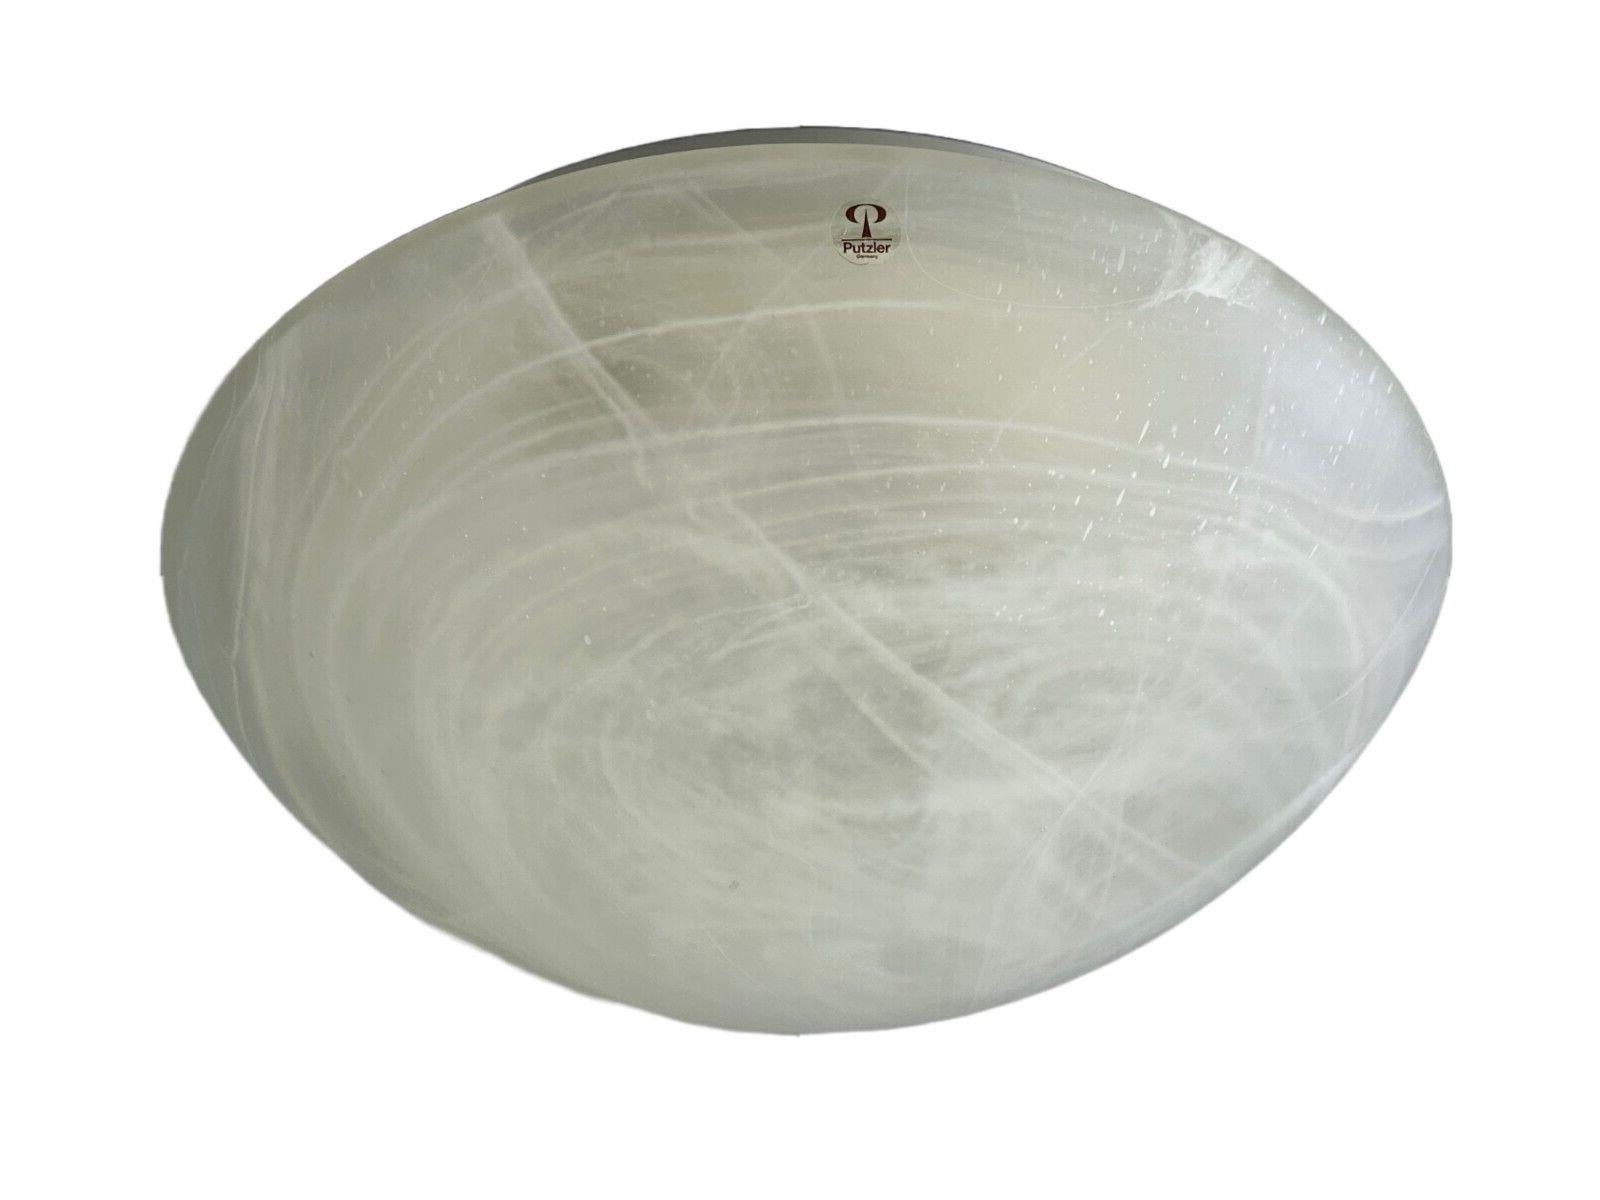 60s 70s Peill & Putzler Germany Plafoniere ceiling lamp glass space design

Object: ceiling lamp

Manufacturer: Peill & Putzler

Condition: good

Age: around 1960-1970

Dimensions:

Diameter = 27.5cm
Height = 11.5cm

Other notes:

E27 socket

The